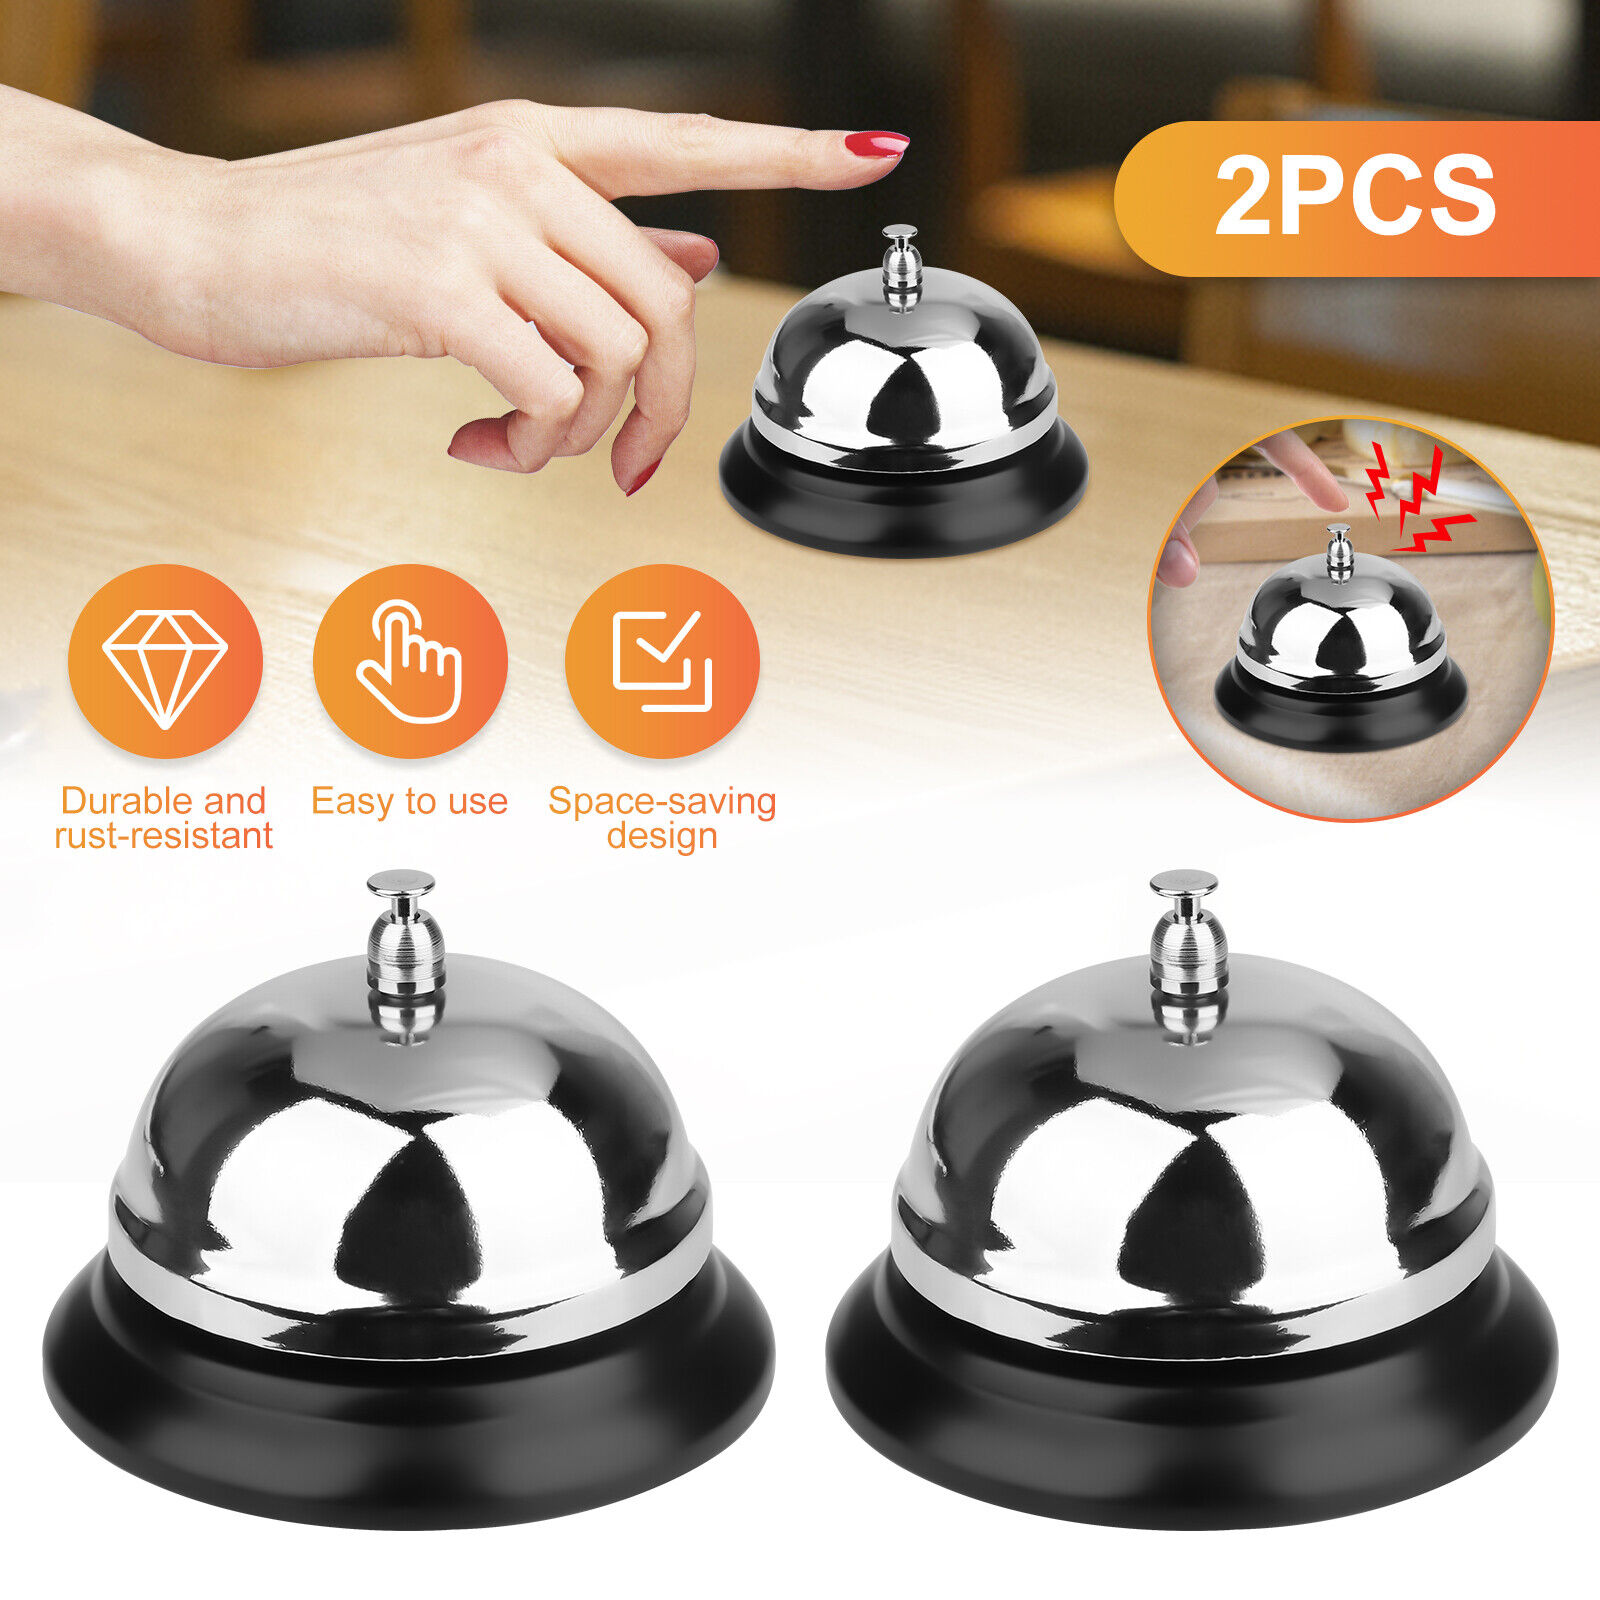 2X Custom Service Desk Bell Counter Call Ring for Kitchen Bar Large Bank Office